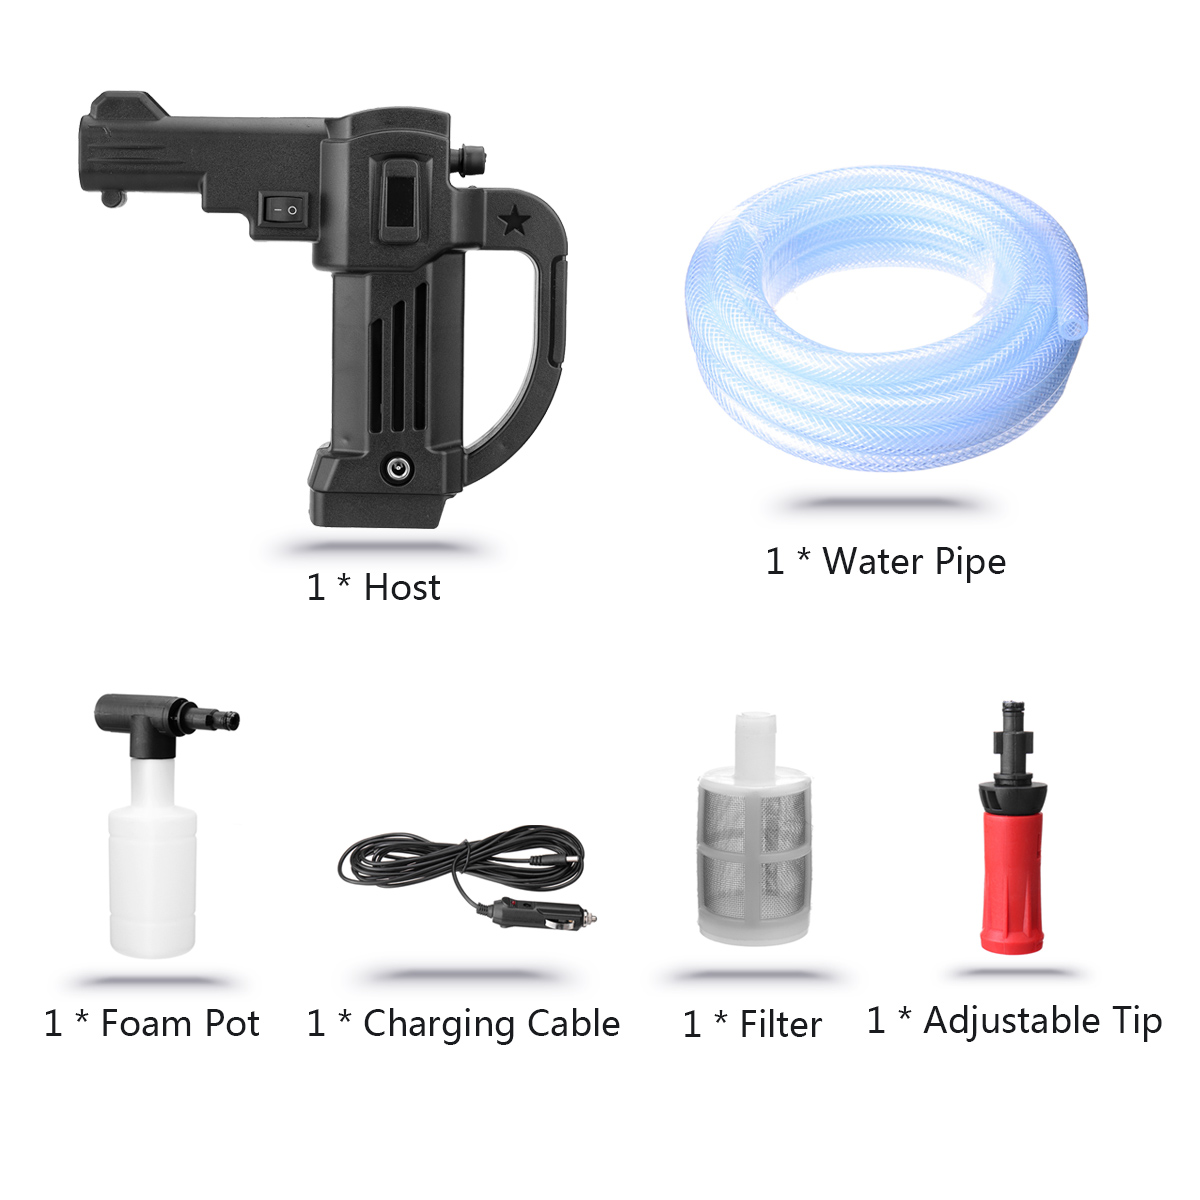 Rechargable-High-Pressure-Car-Washer-Cleaning-Wand-Nozzle-Spray-Guns-Flow-Controls-Tool-W-Filter-Wat-1837431-7